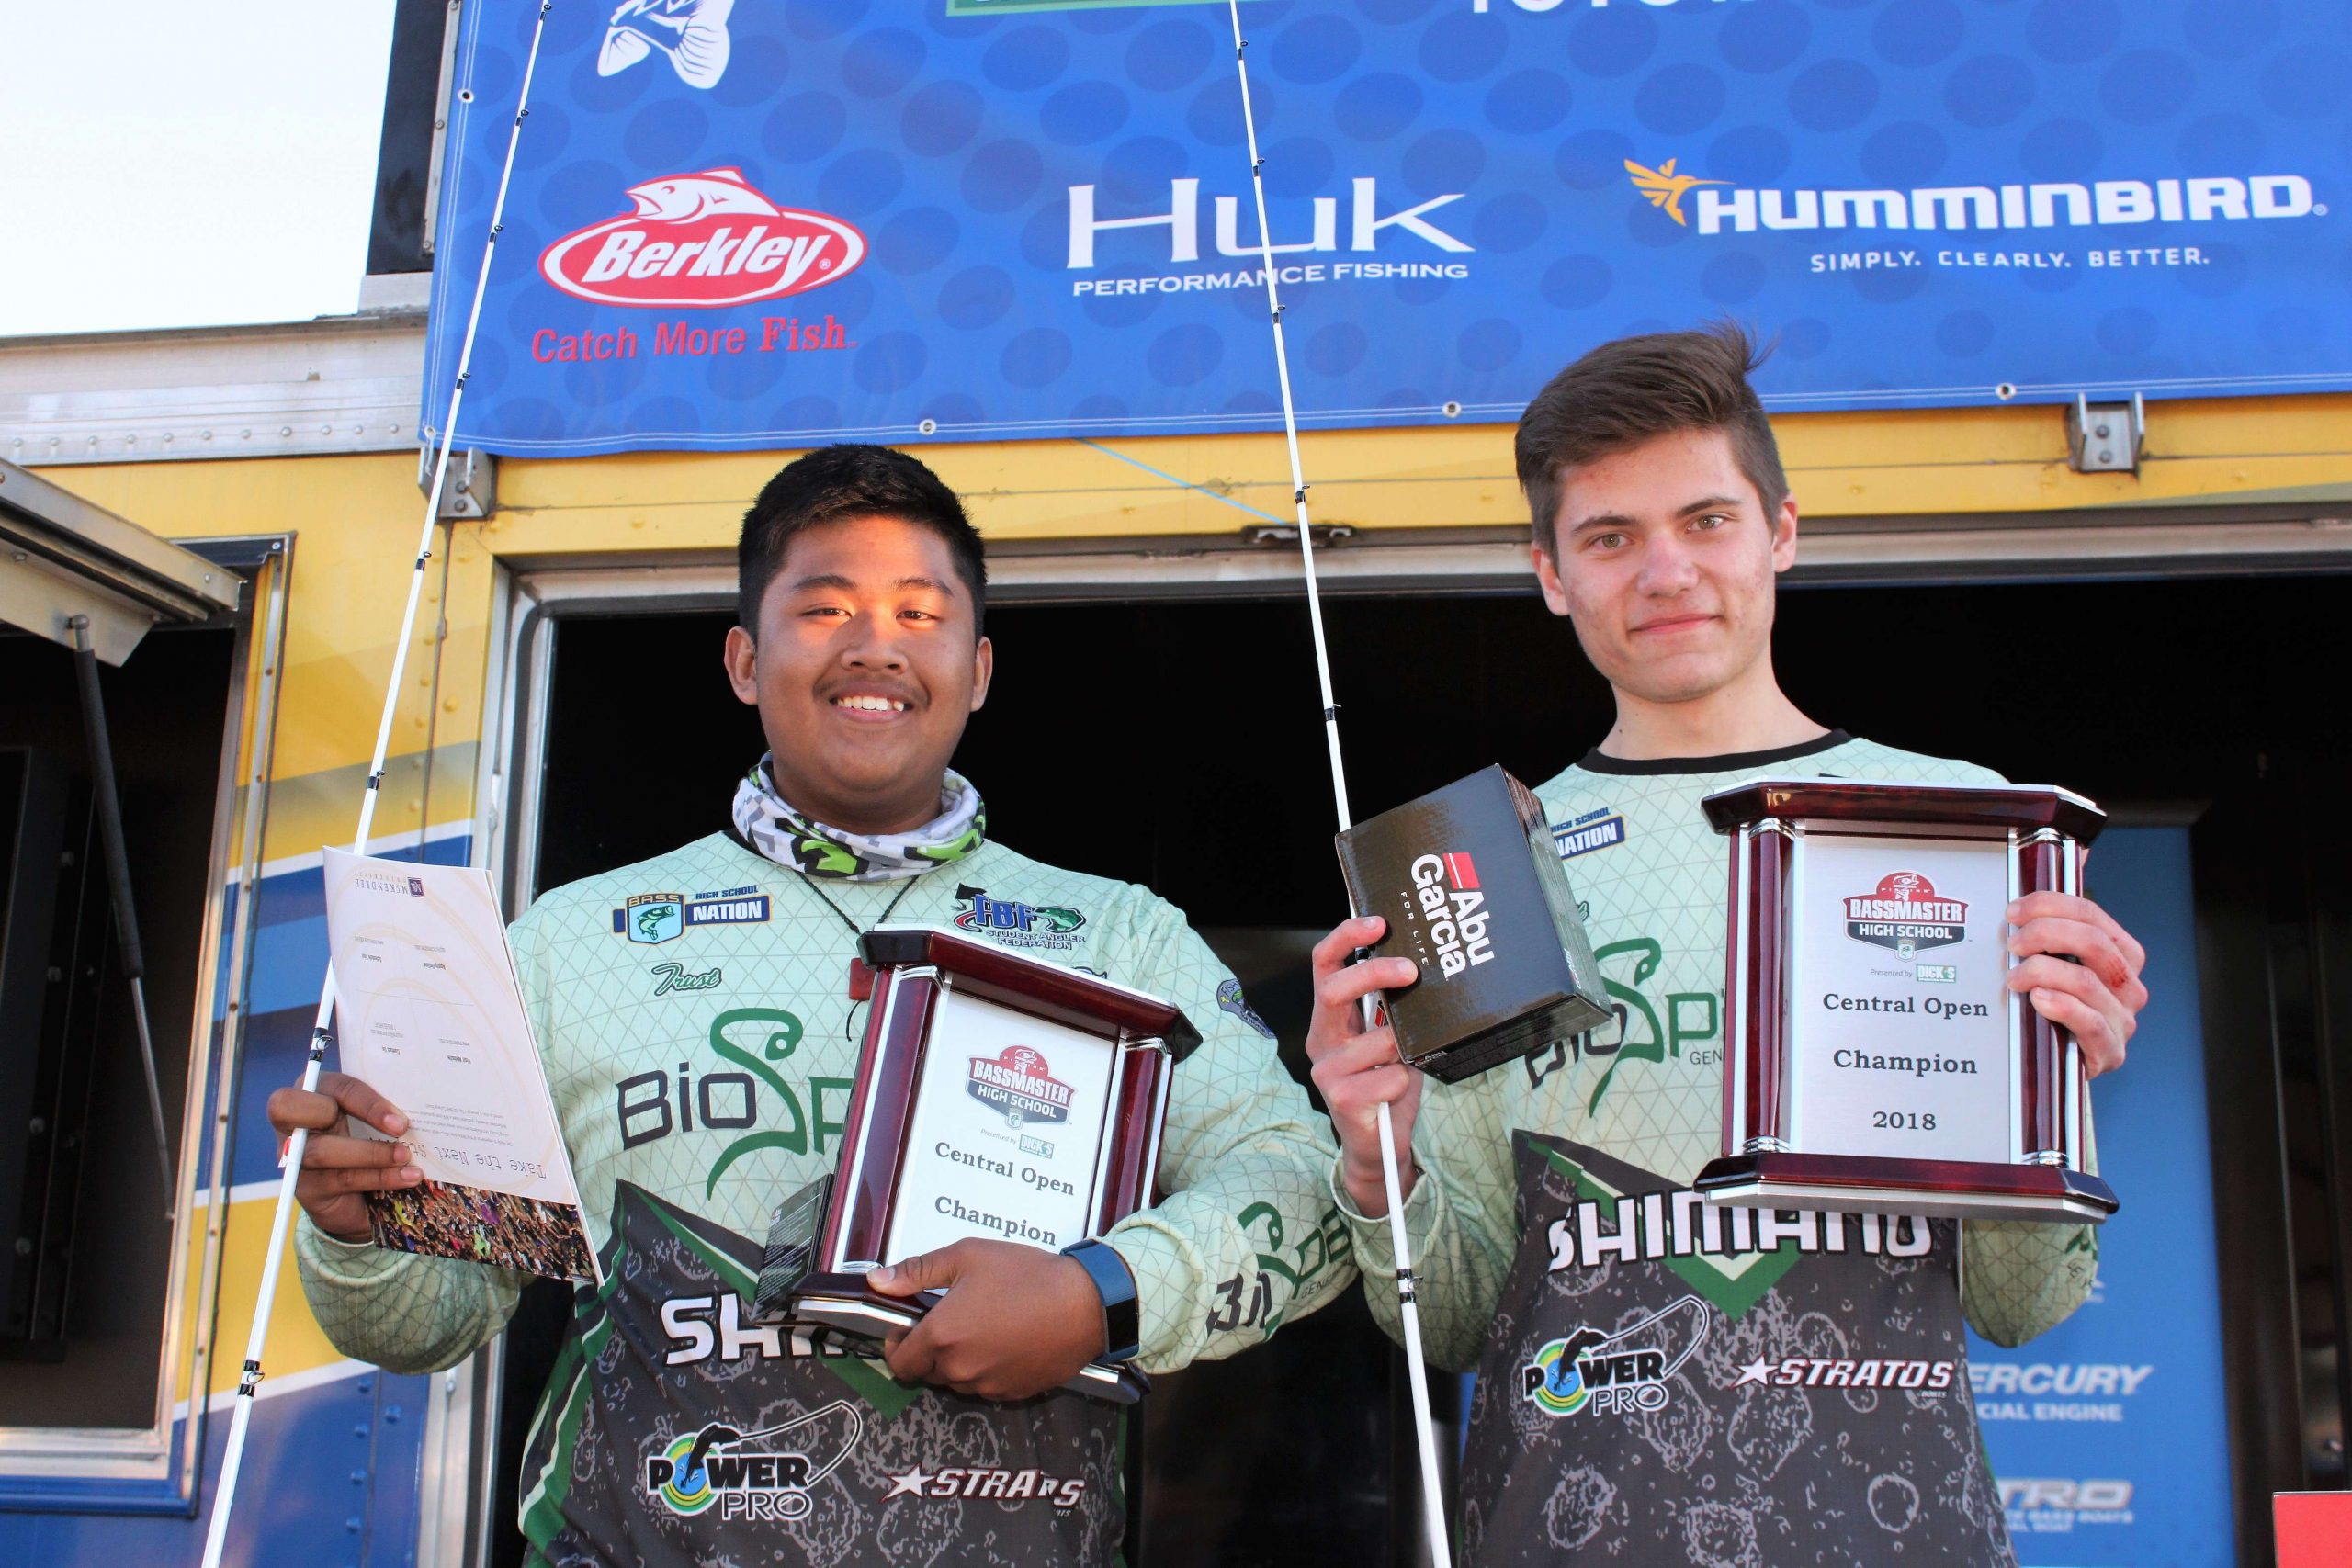 They also won a $250 Mossy Oak gift certificate, Abu Garcia rod/reel combos and $2,000 for their high school. But the Central Open Champion trophy definitely means the most to them.